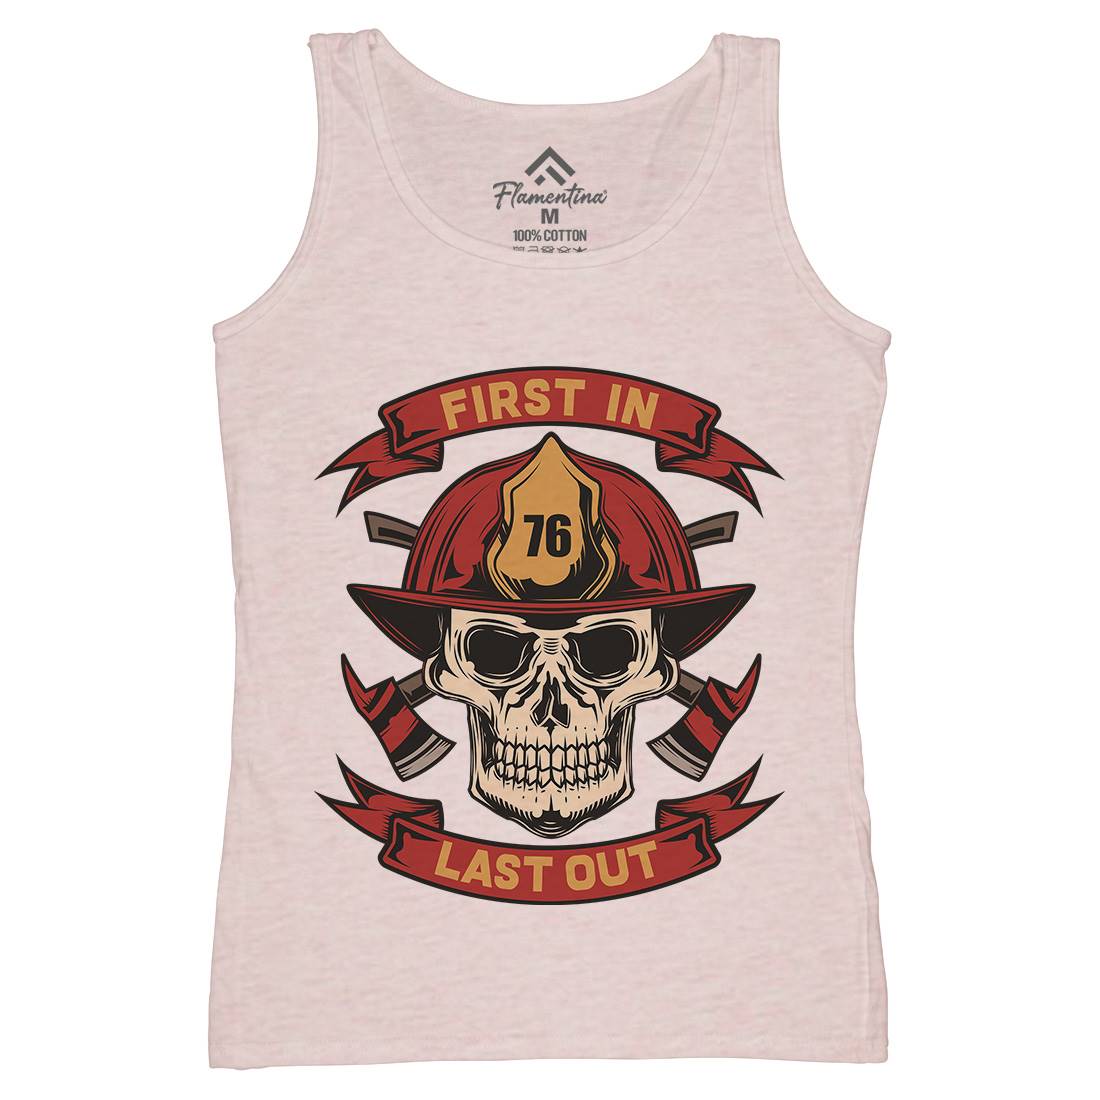 First In Last Out Womens Organic Tank Top Vest Firefighters C825